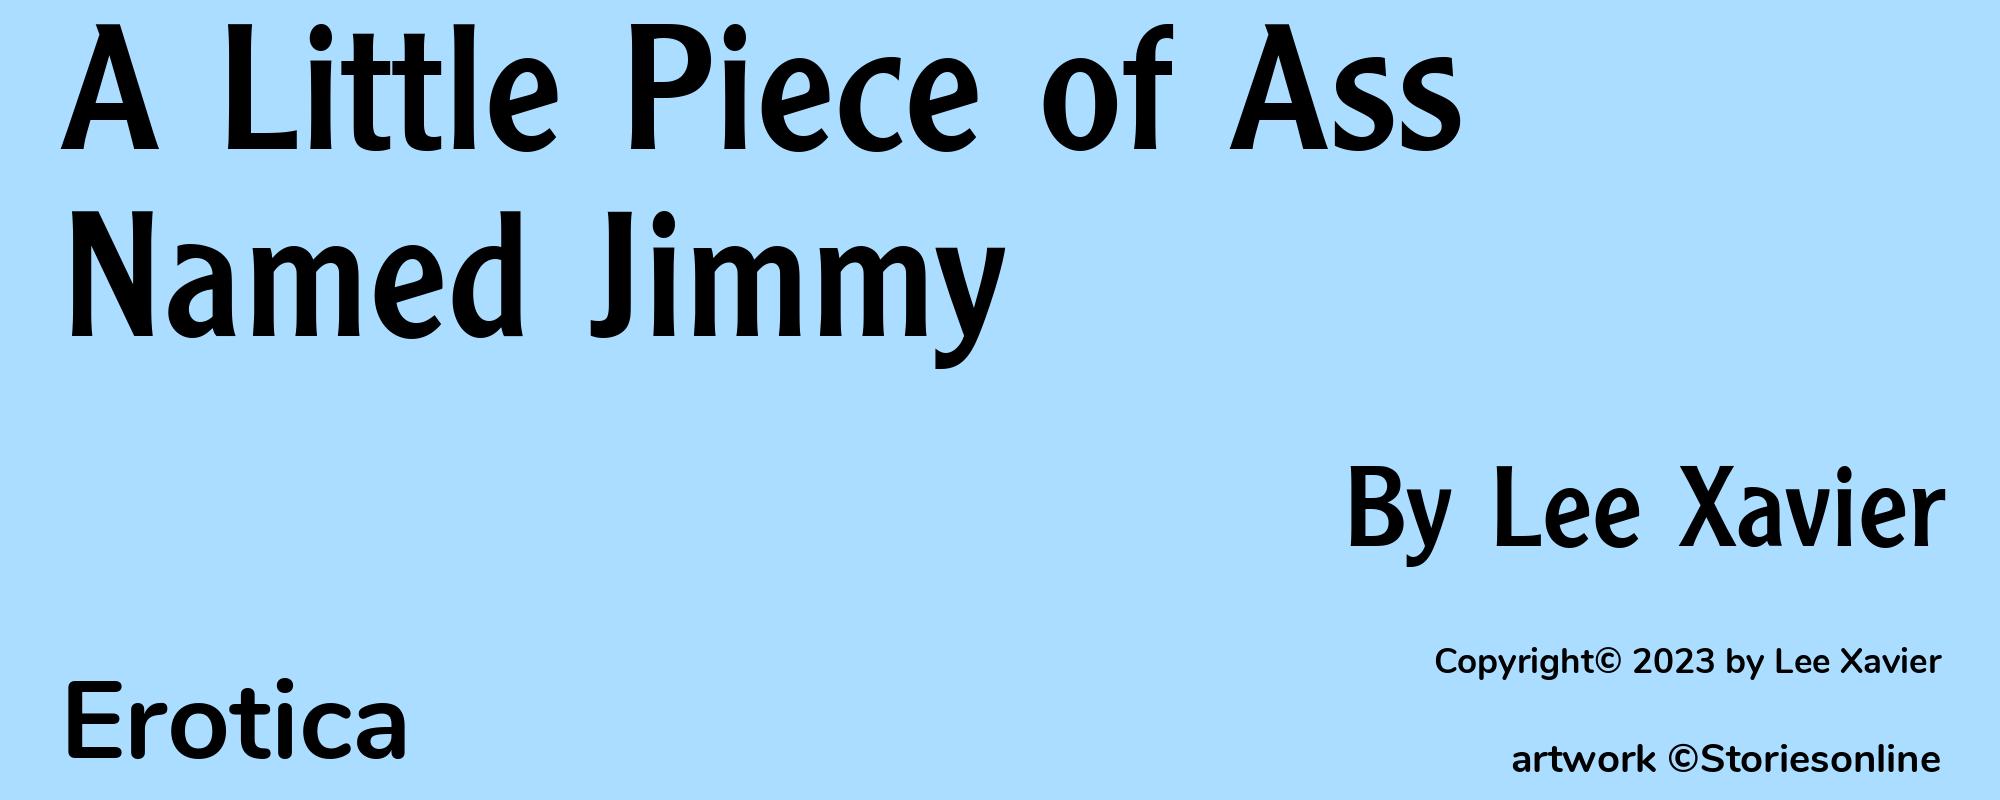 A Little Piece of Ass Named Jimmy - Cover